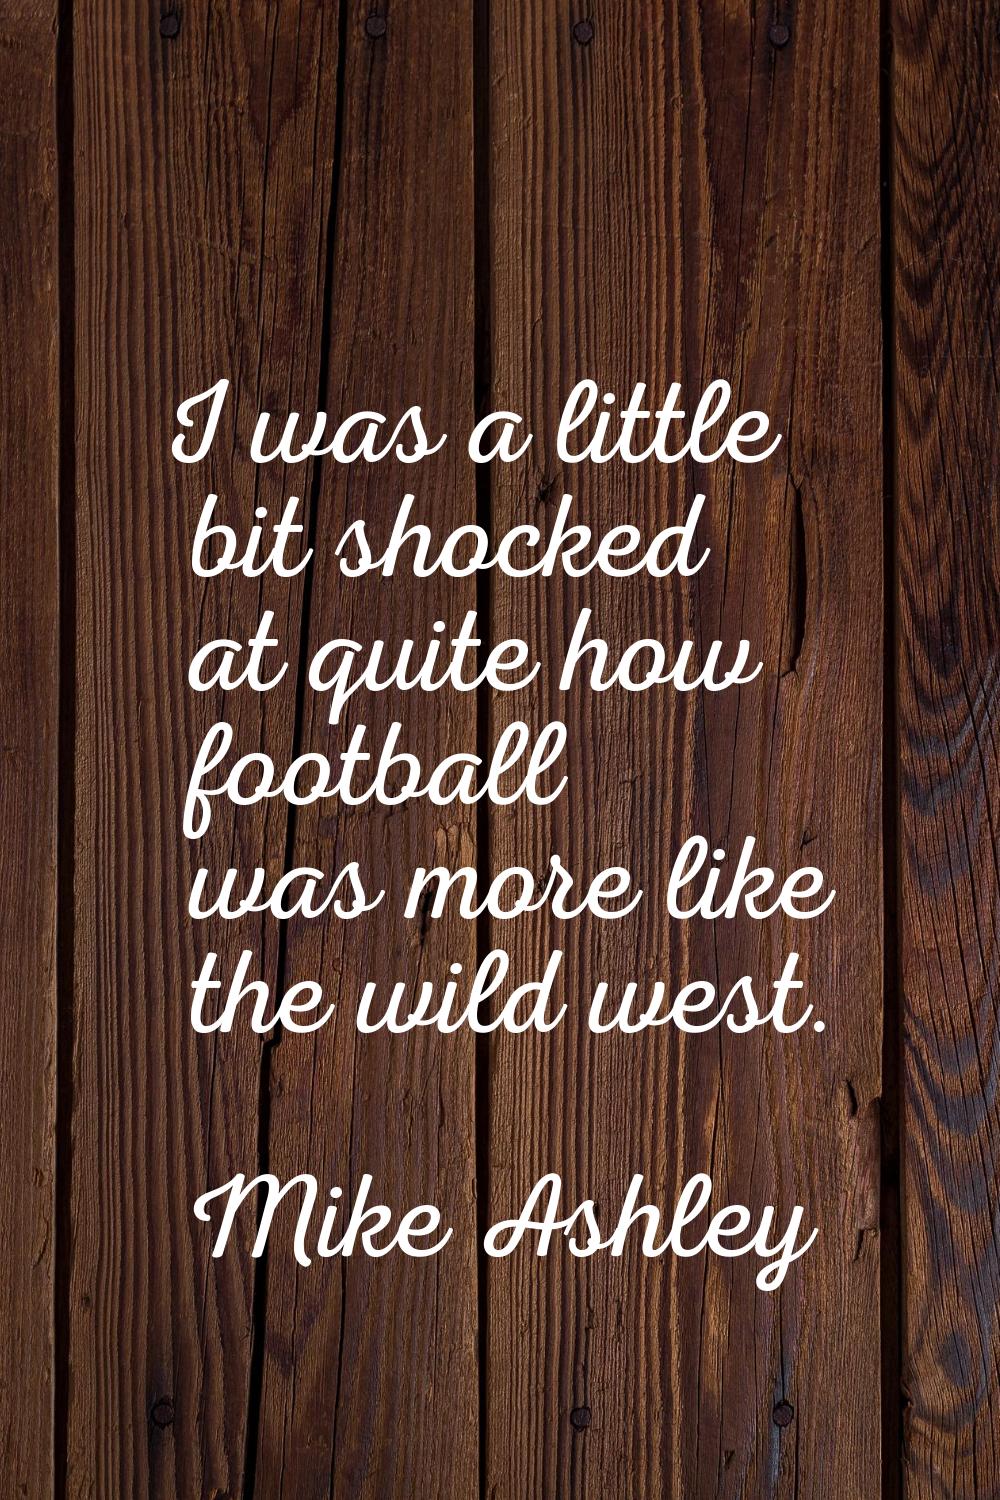 I was a little bit shocked at quite how football was more like the wild west.